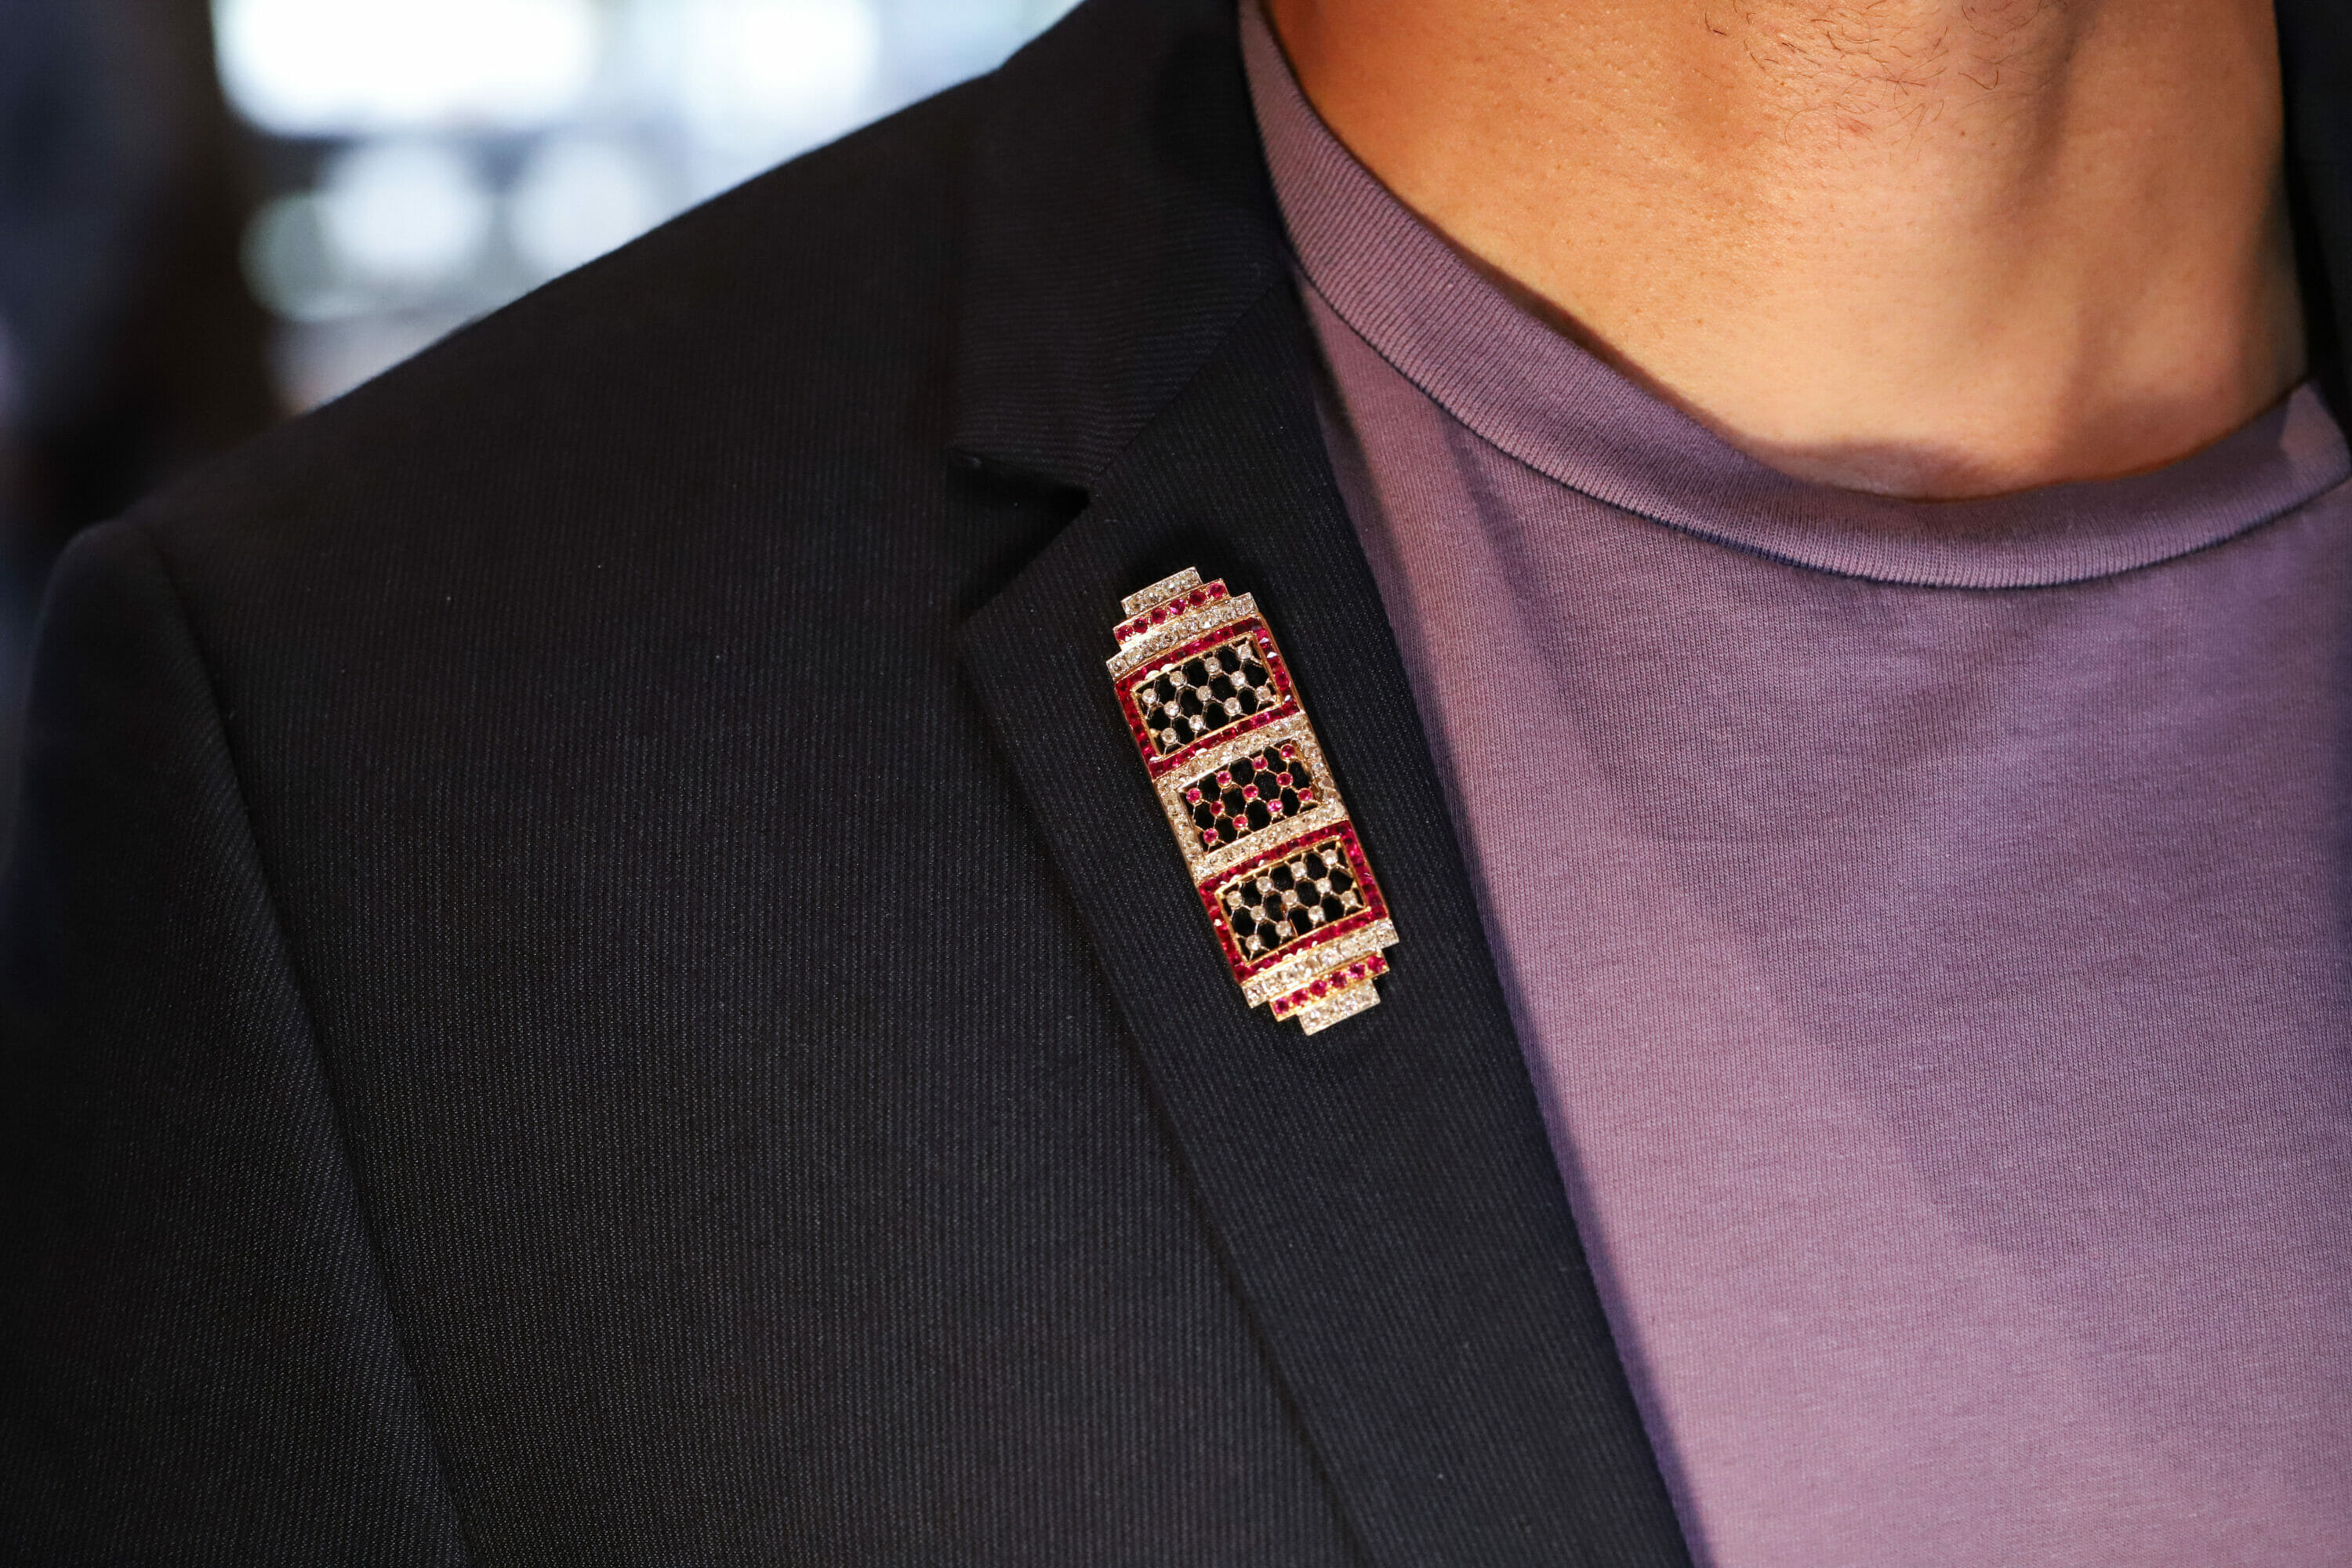 Pinterest-ing: A Roundup of Men's Brooches